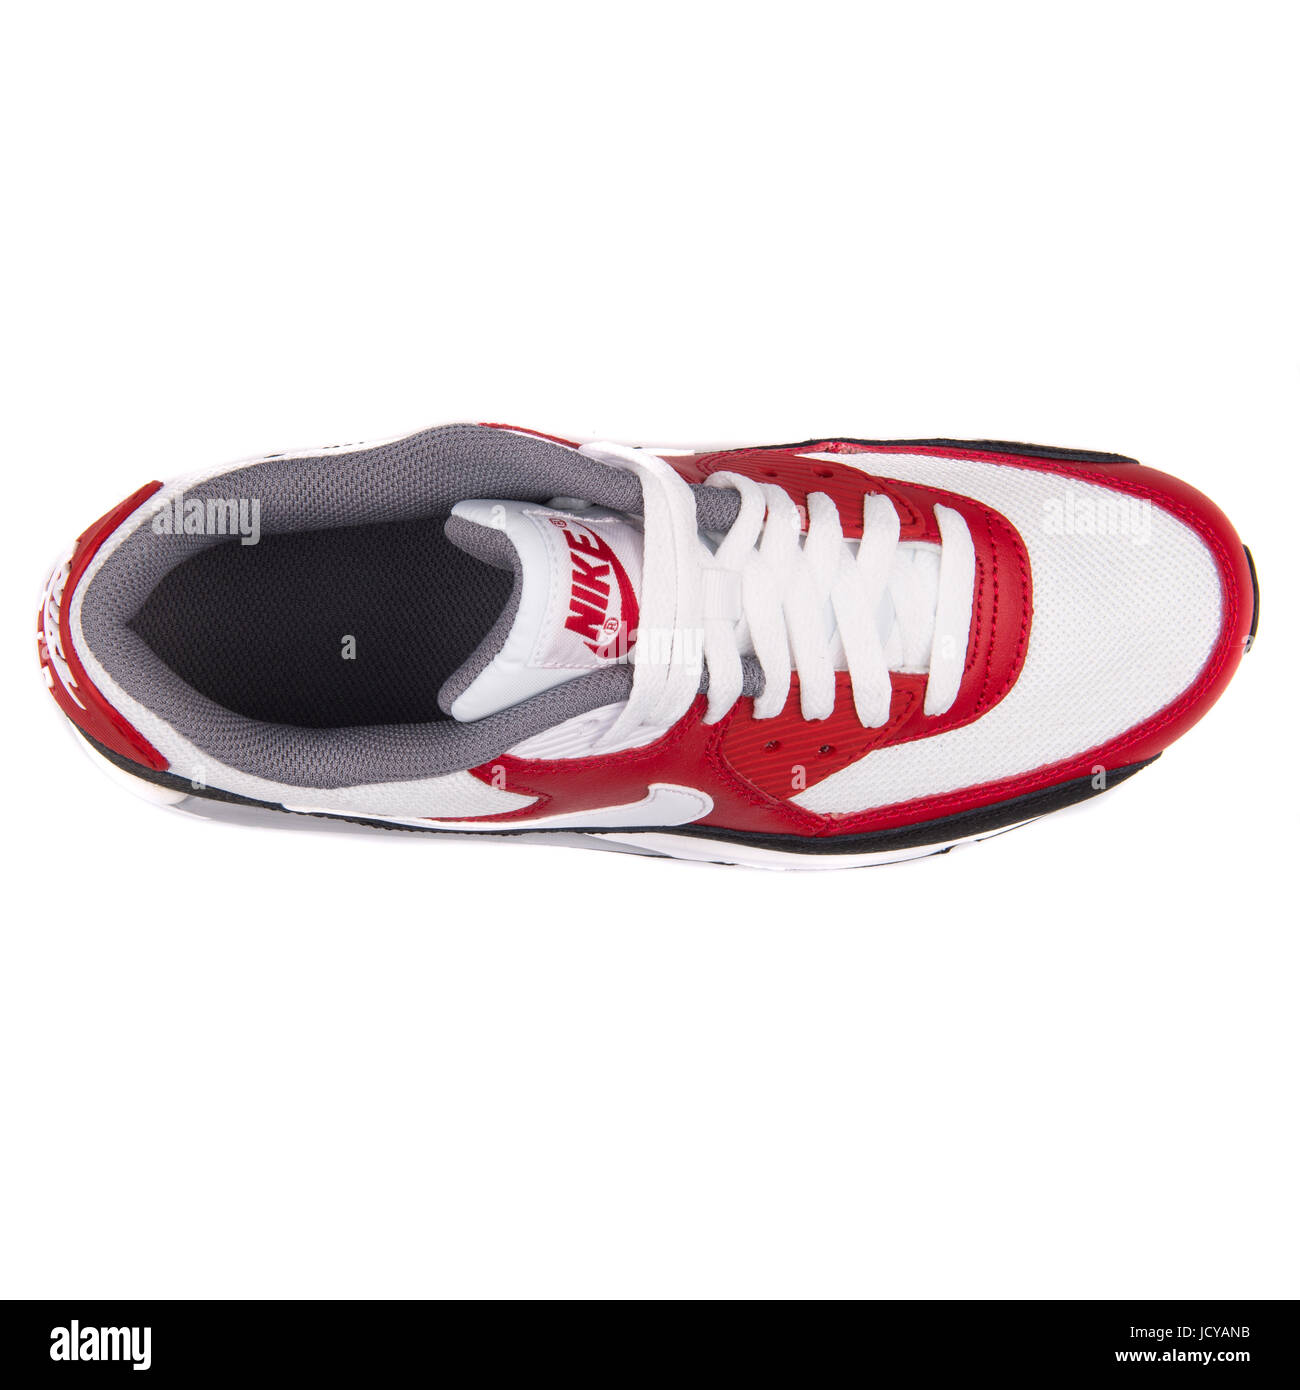 Nike Air Max 90 Mesh (GS) White, Red and Black Youth's Running Shoes -  724824-102 Stock Photo - Alamy